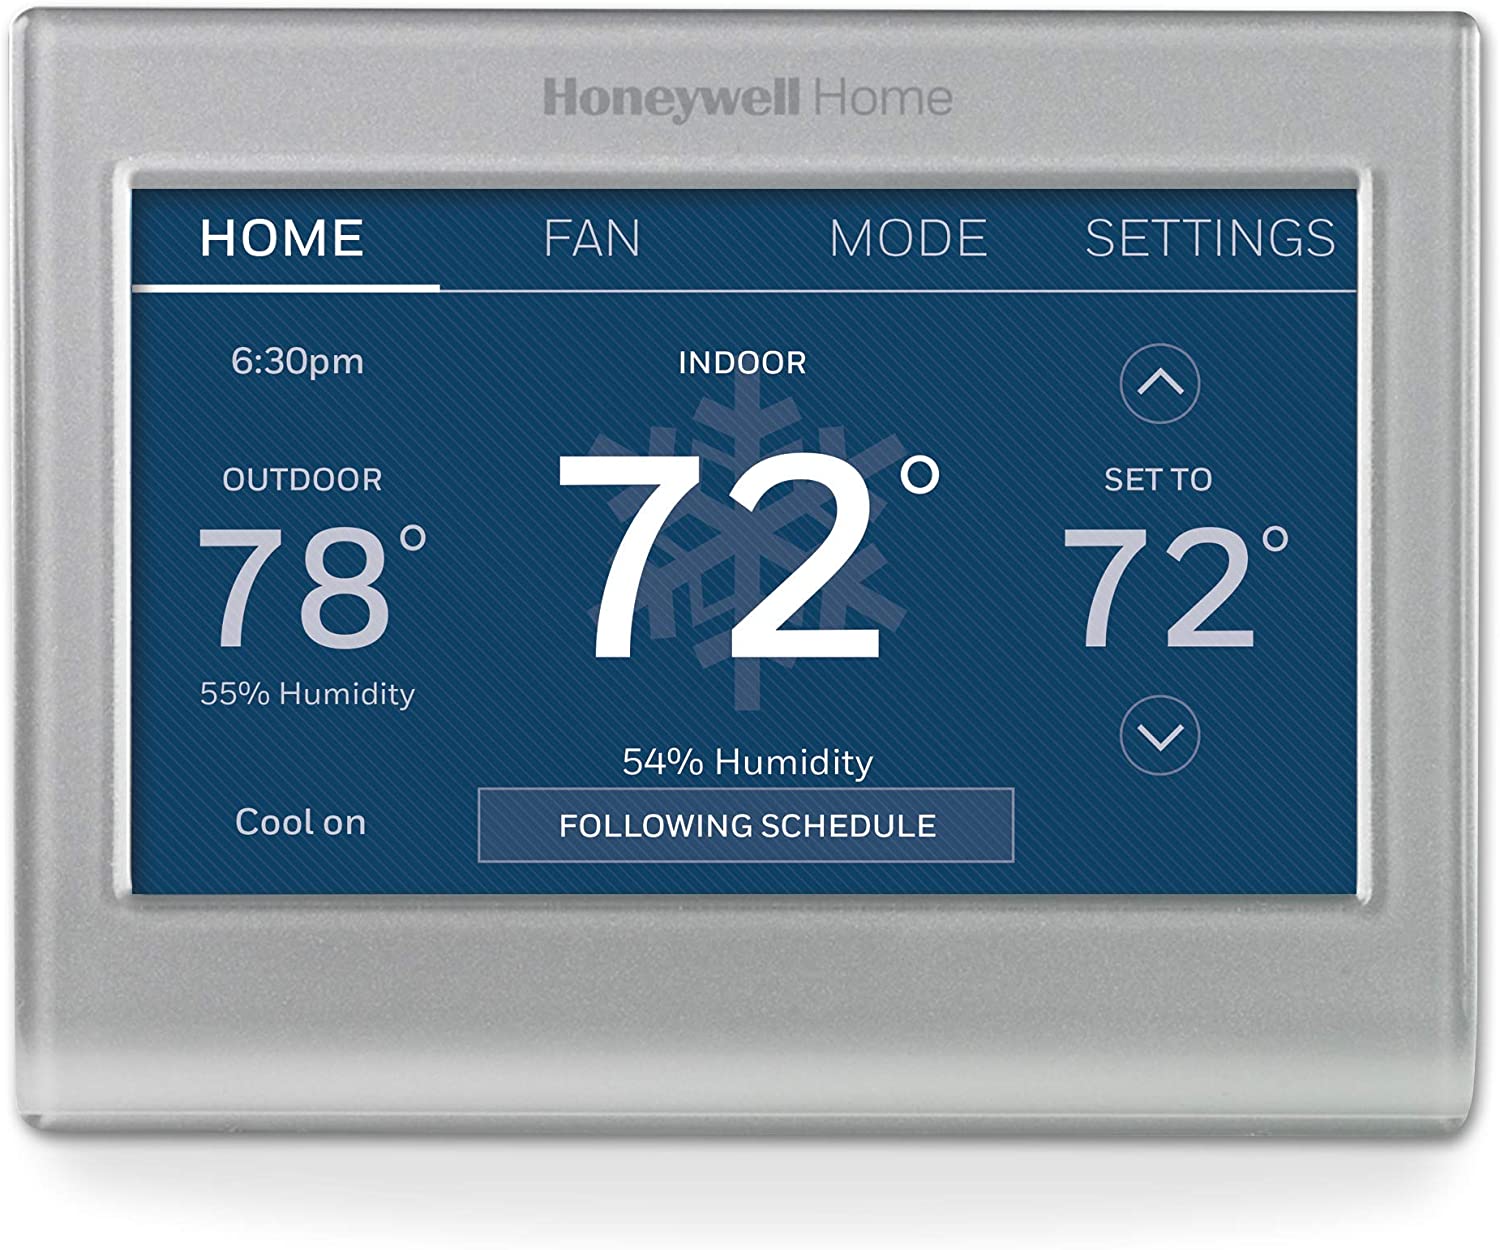 Honeywell Home RTH9585WF1004 Wi-Fi Smart Color Thermostat, 7 Day Programmable, Touch Screen, Energy Star, Alexa Ready - Pro-Distributing